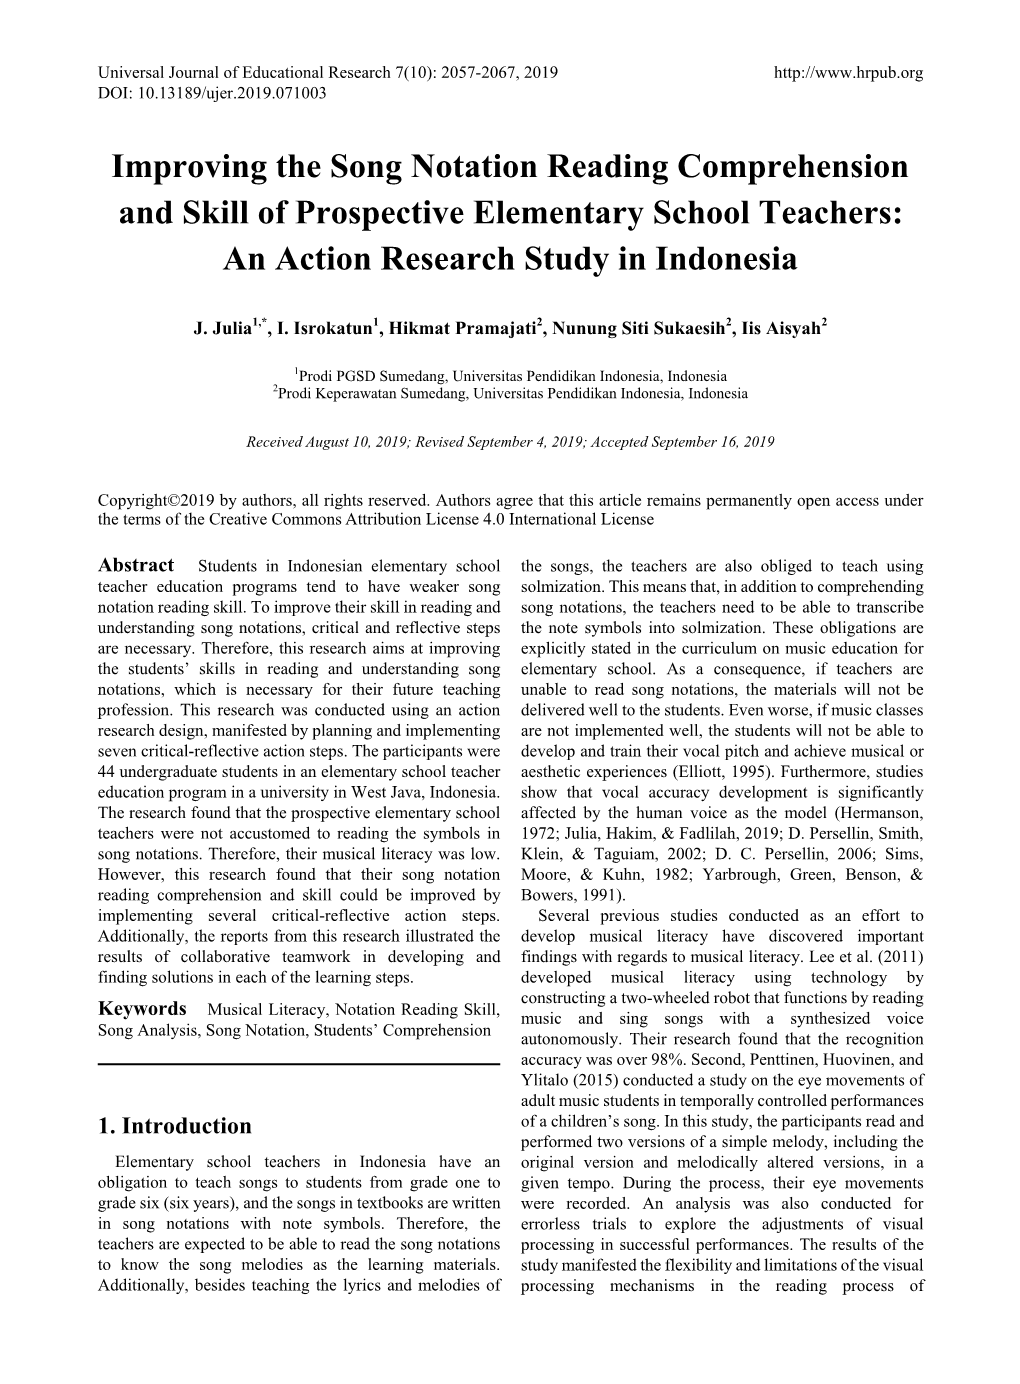 Improving the Song Notation Reading Comprehension and Skill of Prospective Elementary School Teachers: an Action Research Study in Indonesia